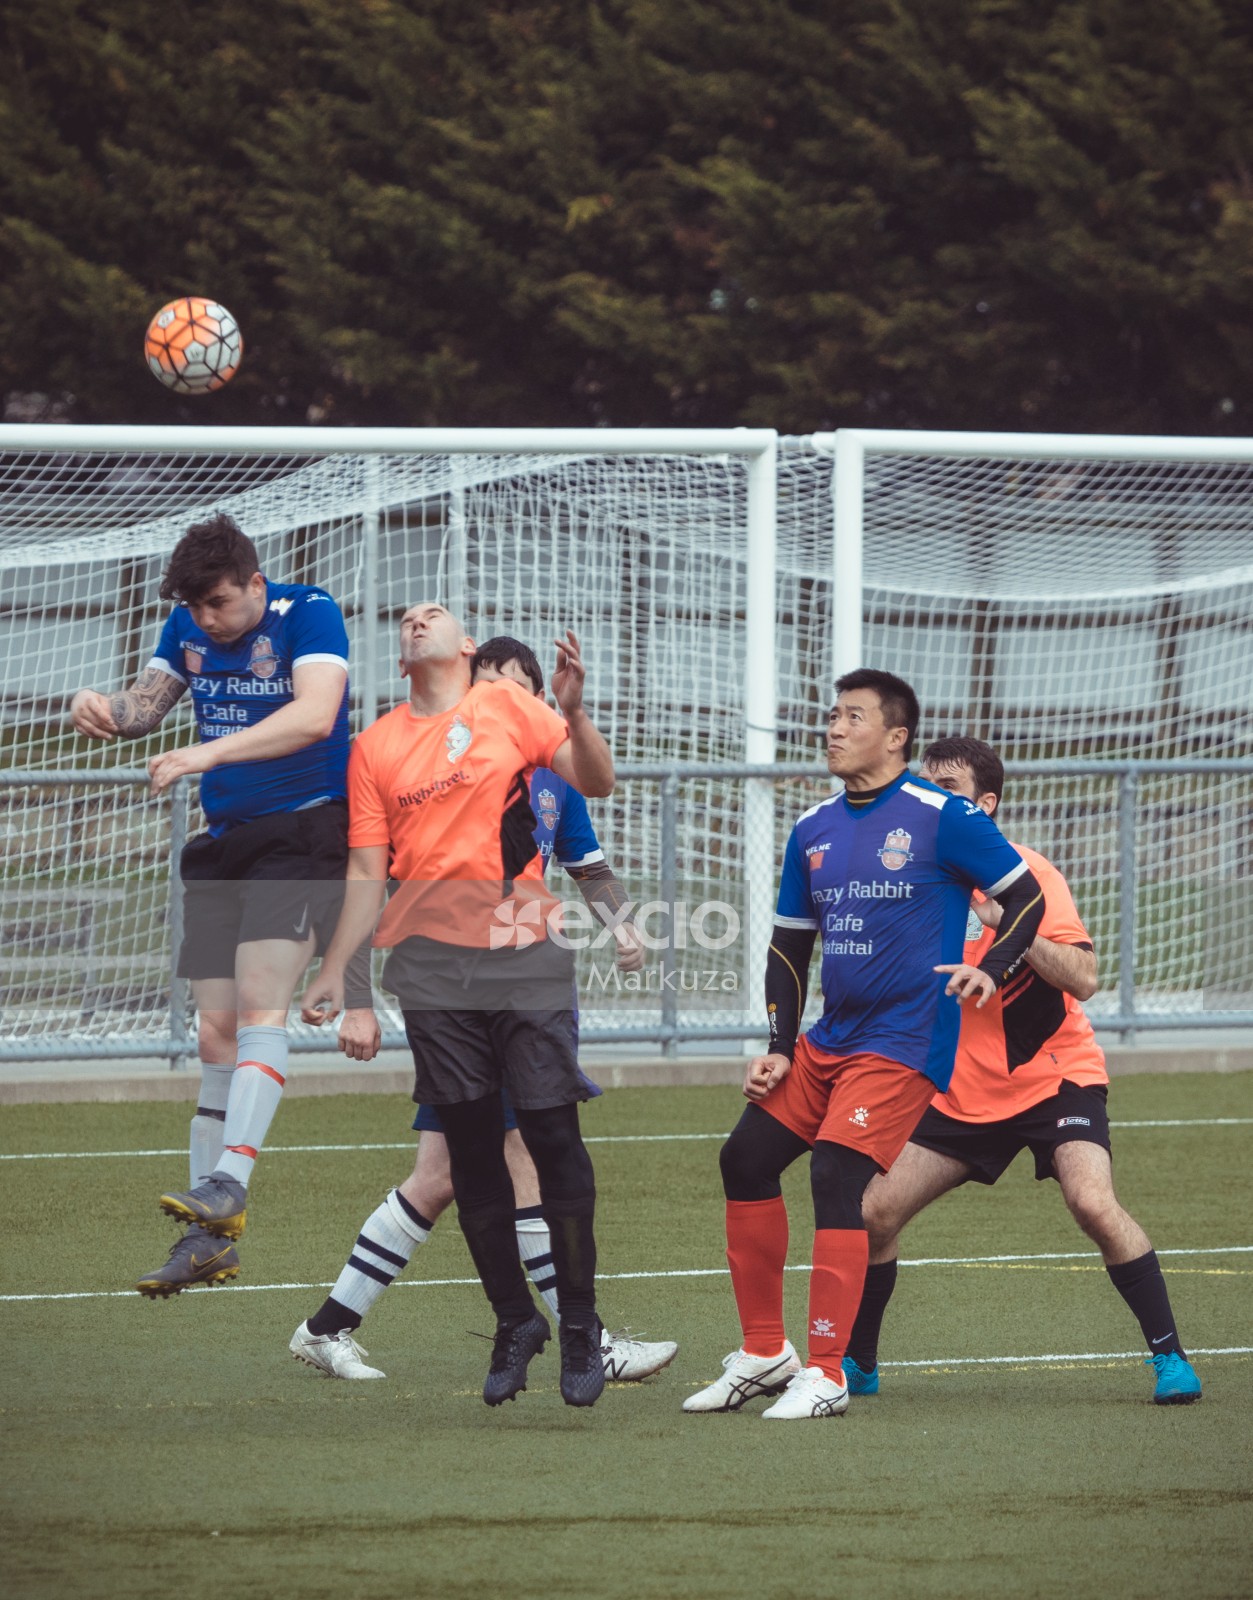 Bald player in orange shirt trying to hit a header - Sports Zone sunday league